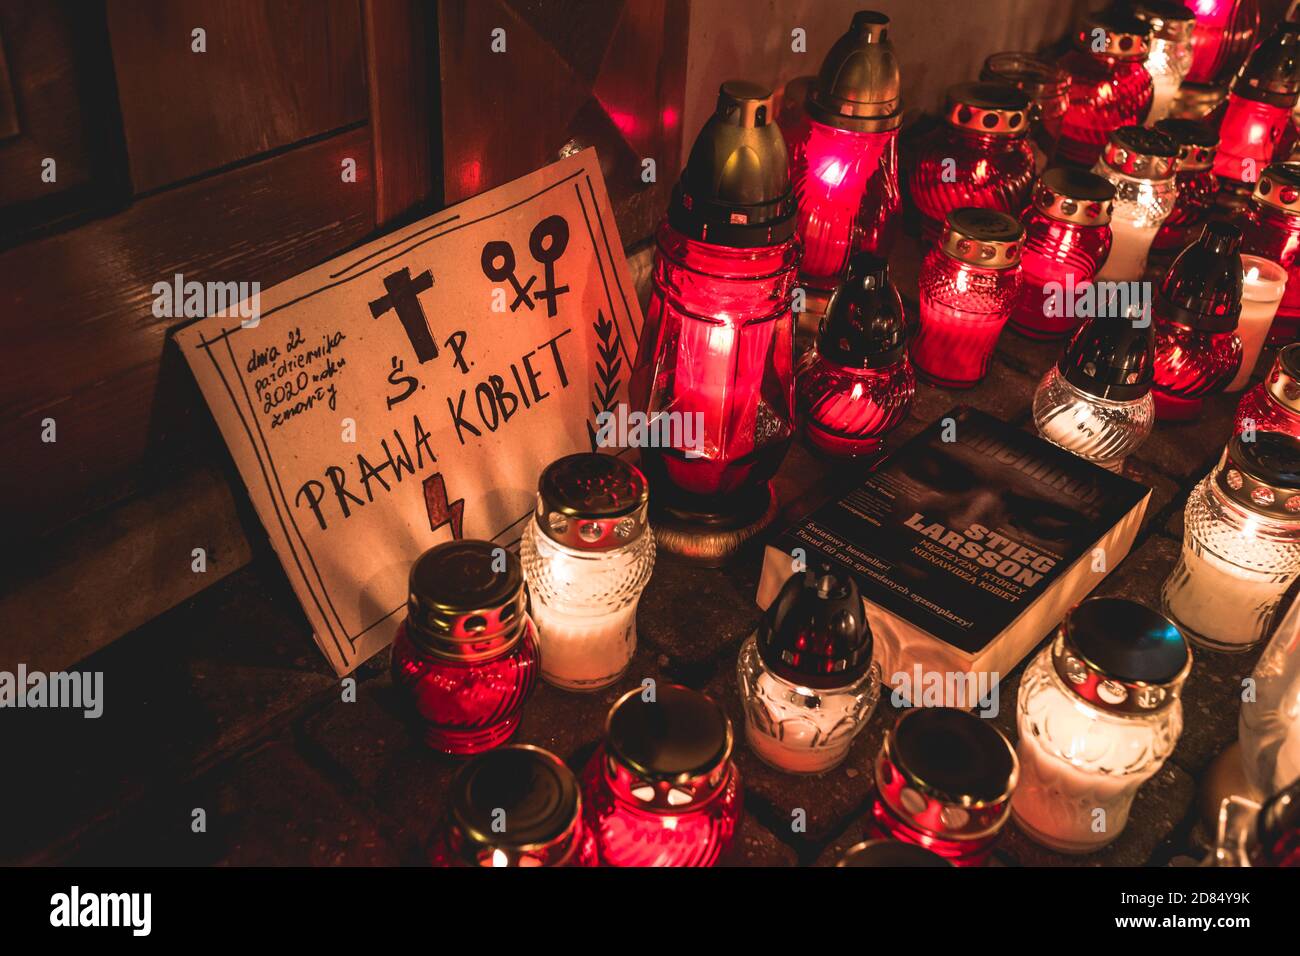 Lublin, Poland - October 23, 2020: Banner and grave candles during protest organized by Strajk Kobiet against abortion ban in Poland Stock Photo